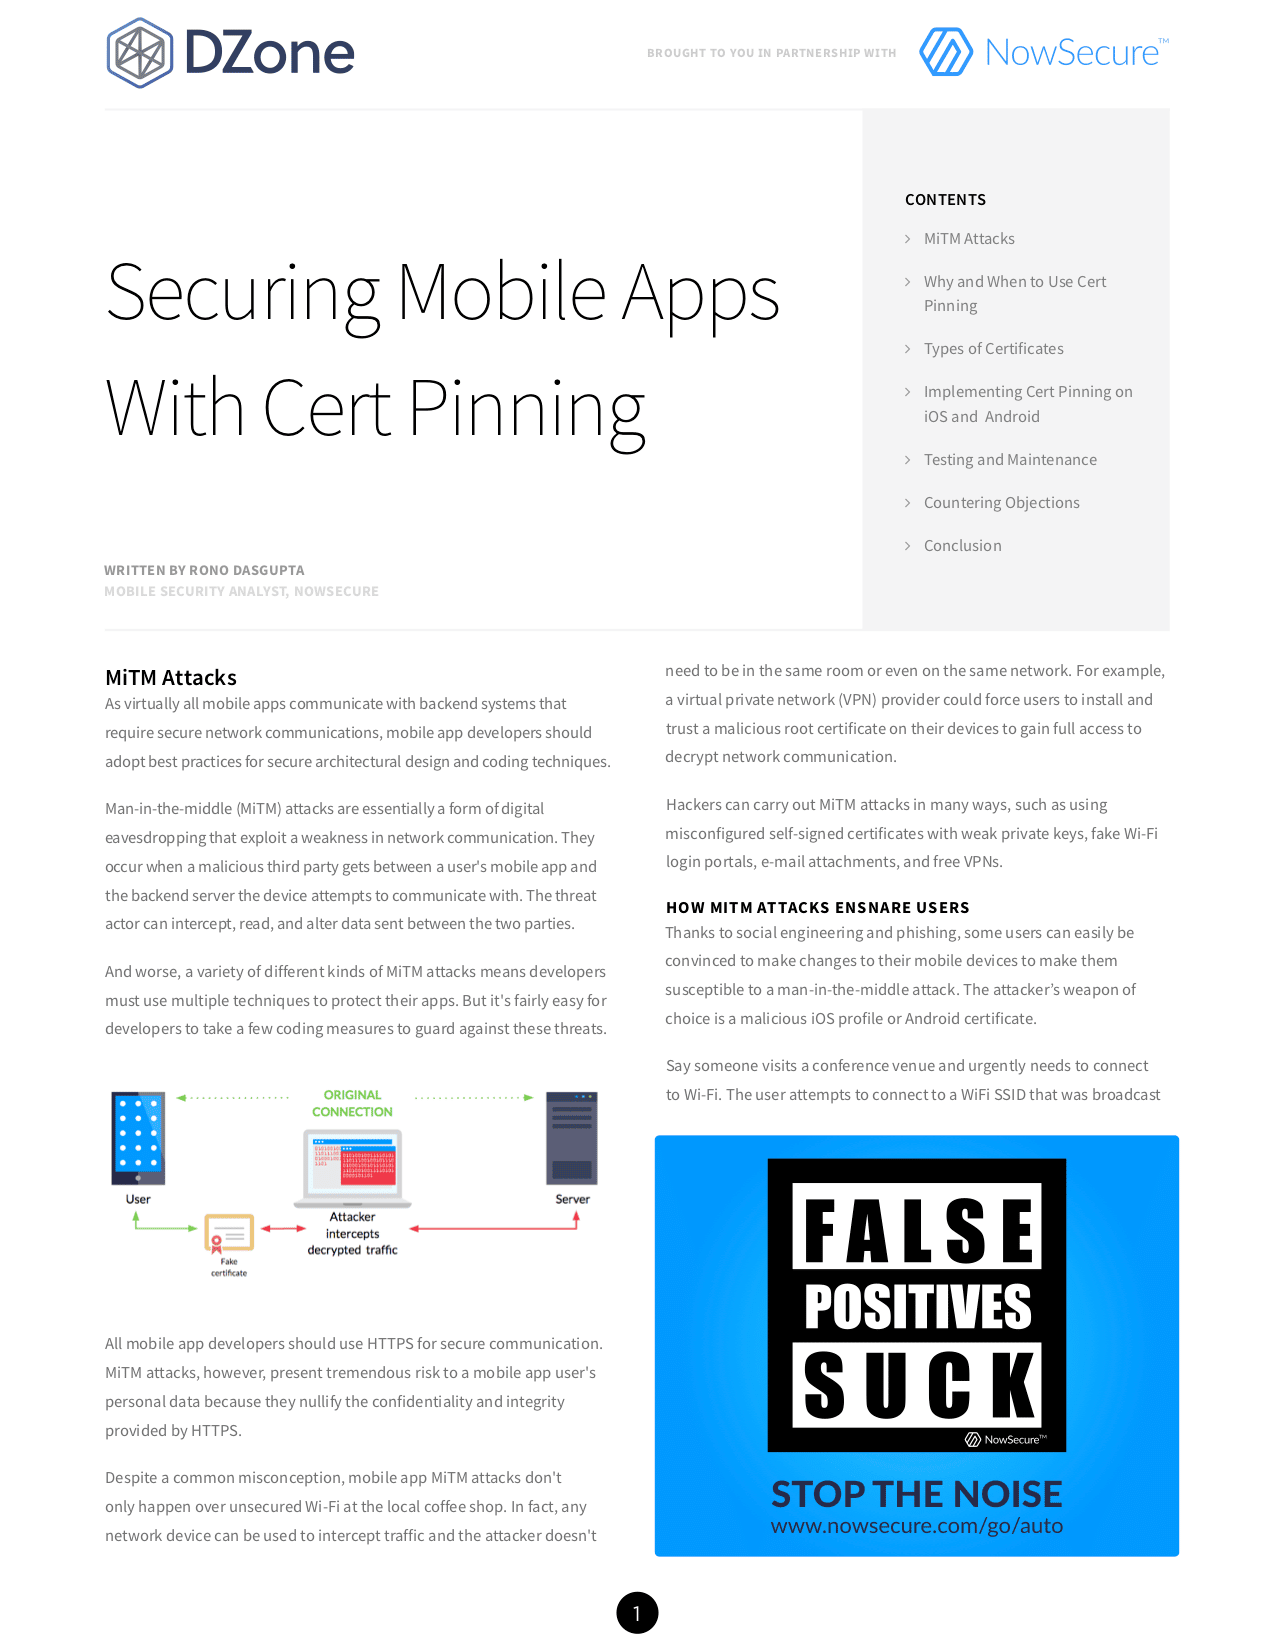 Securing Mobile Apps with Cert Pinning Cover